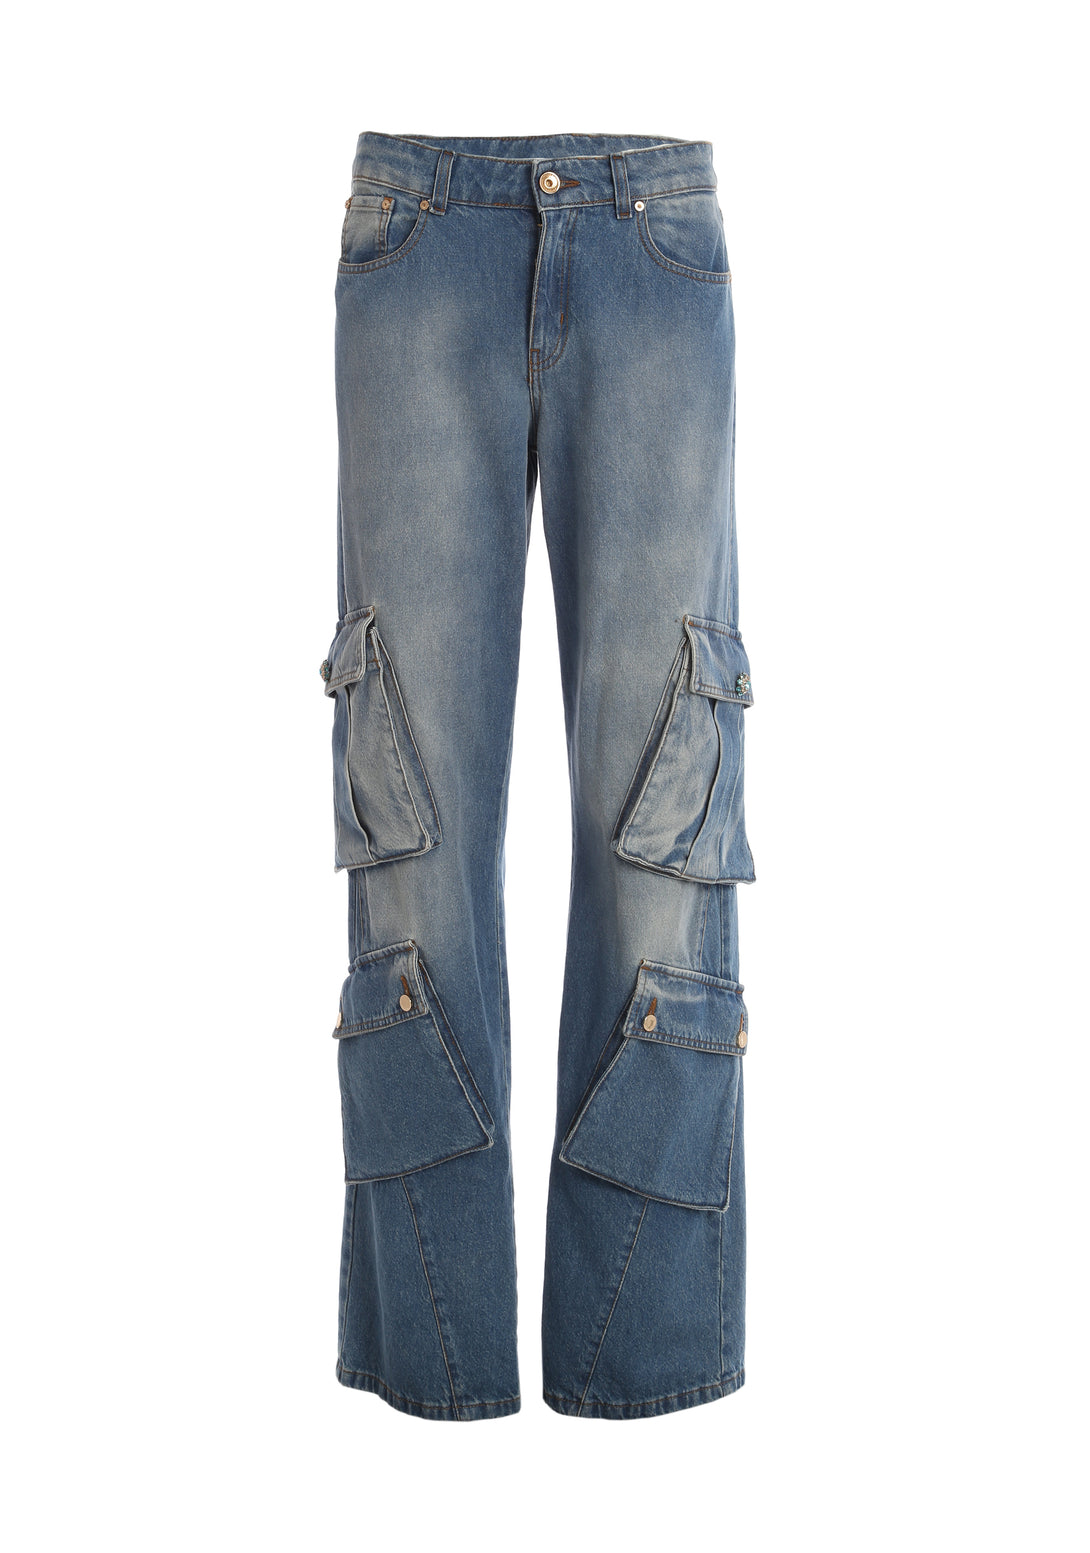 Cargo jeans flare made in denim with vintage wash